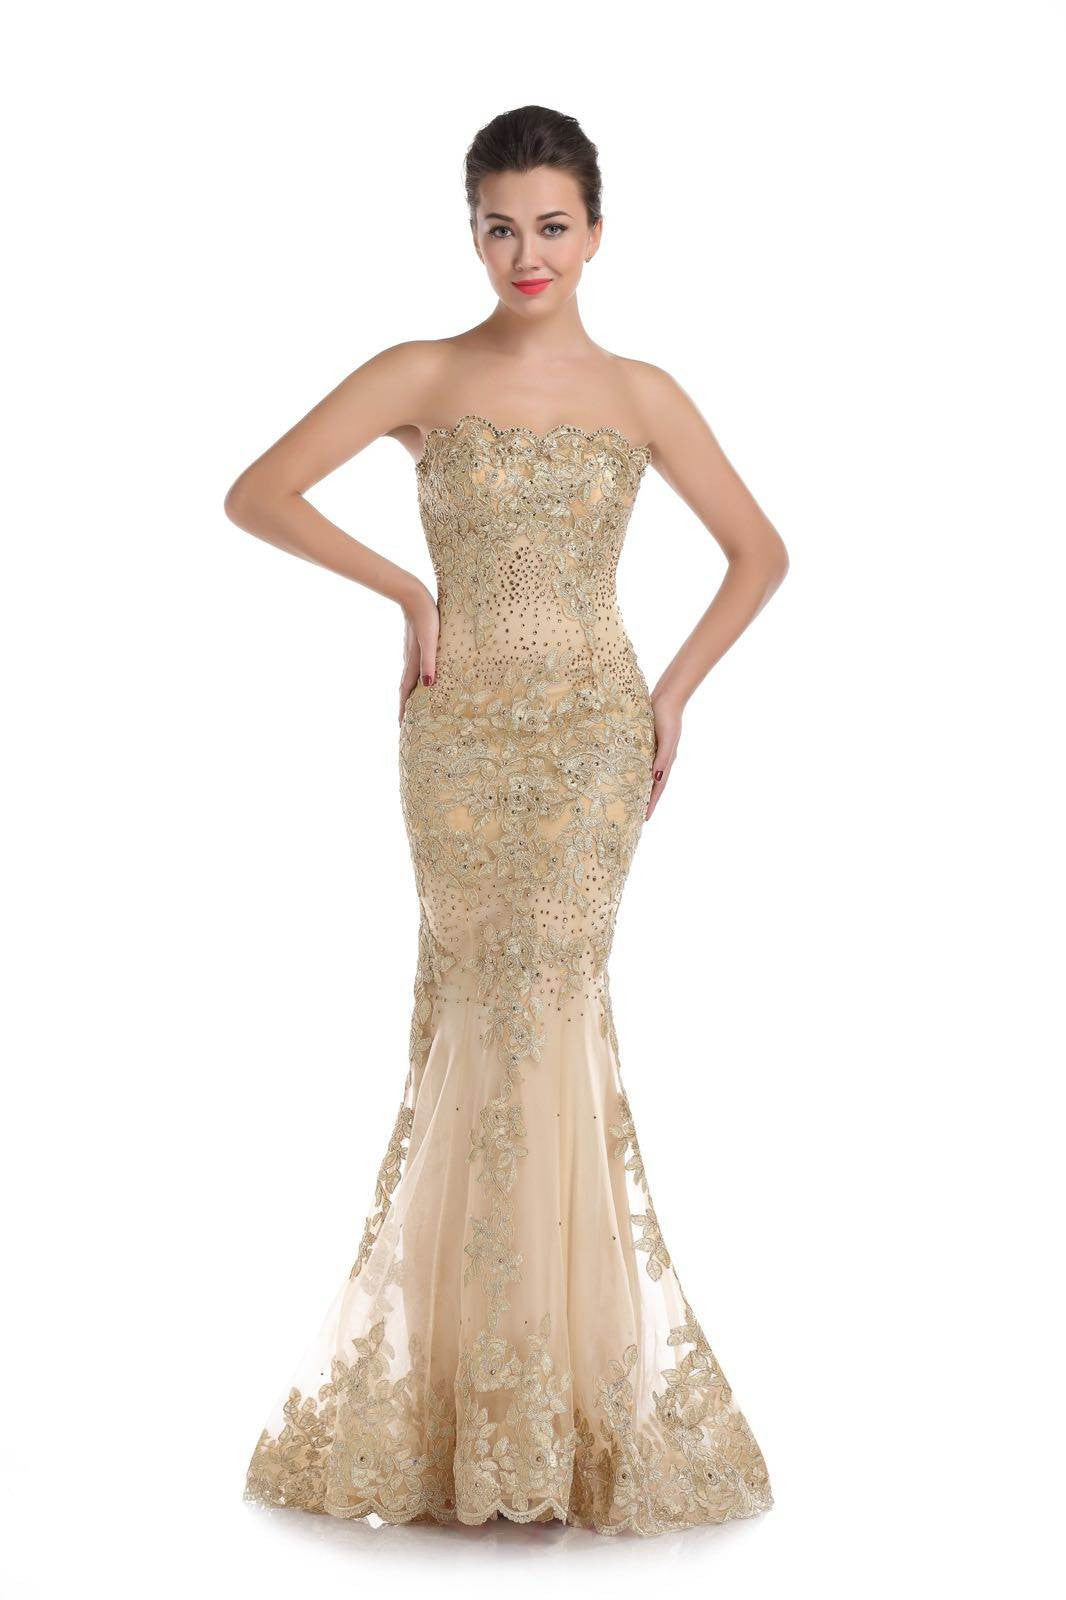 Strapless Illusion Fit and Flare Gown